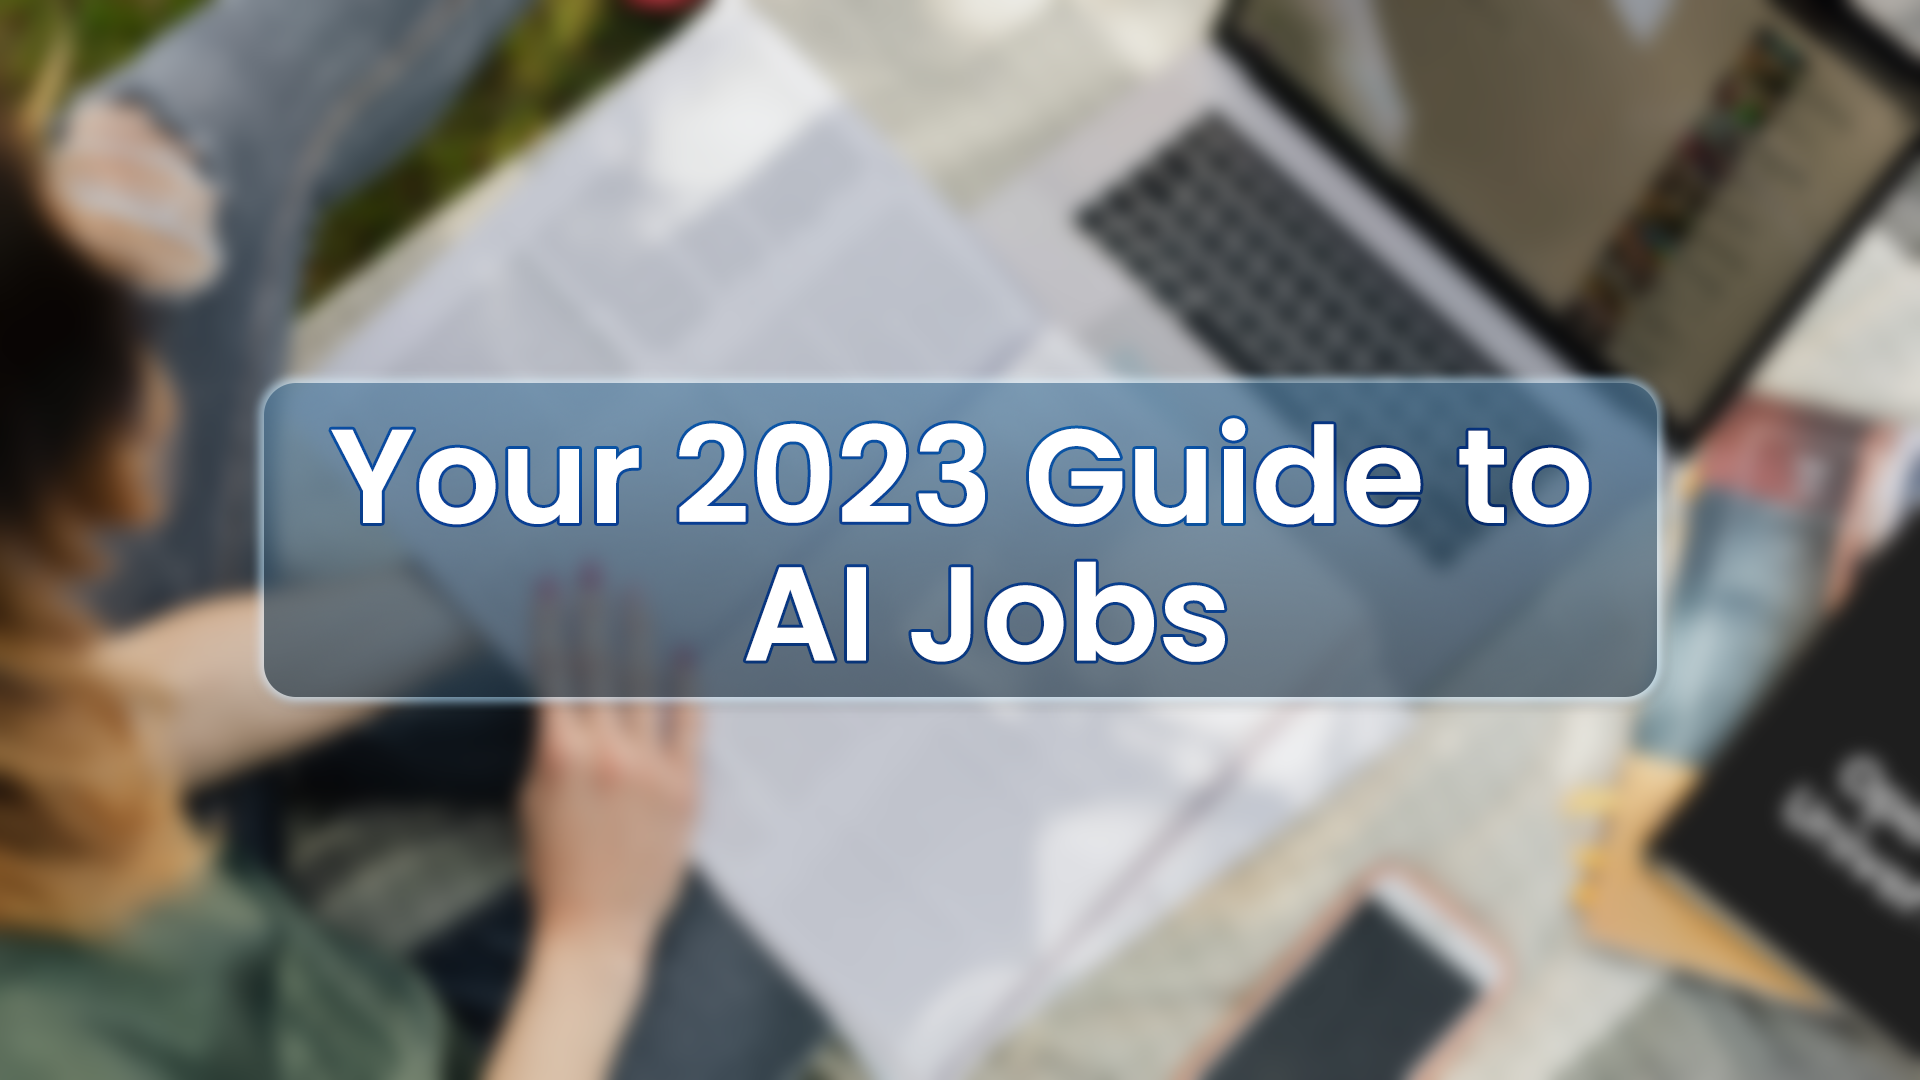 introduction to ai jobs in 2023